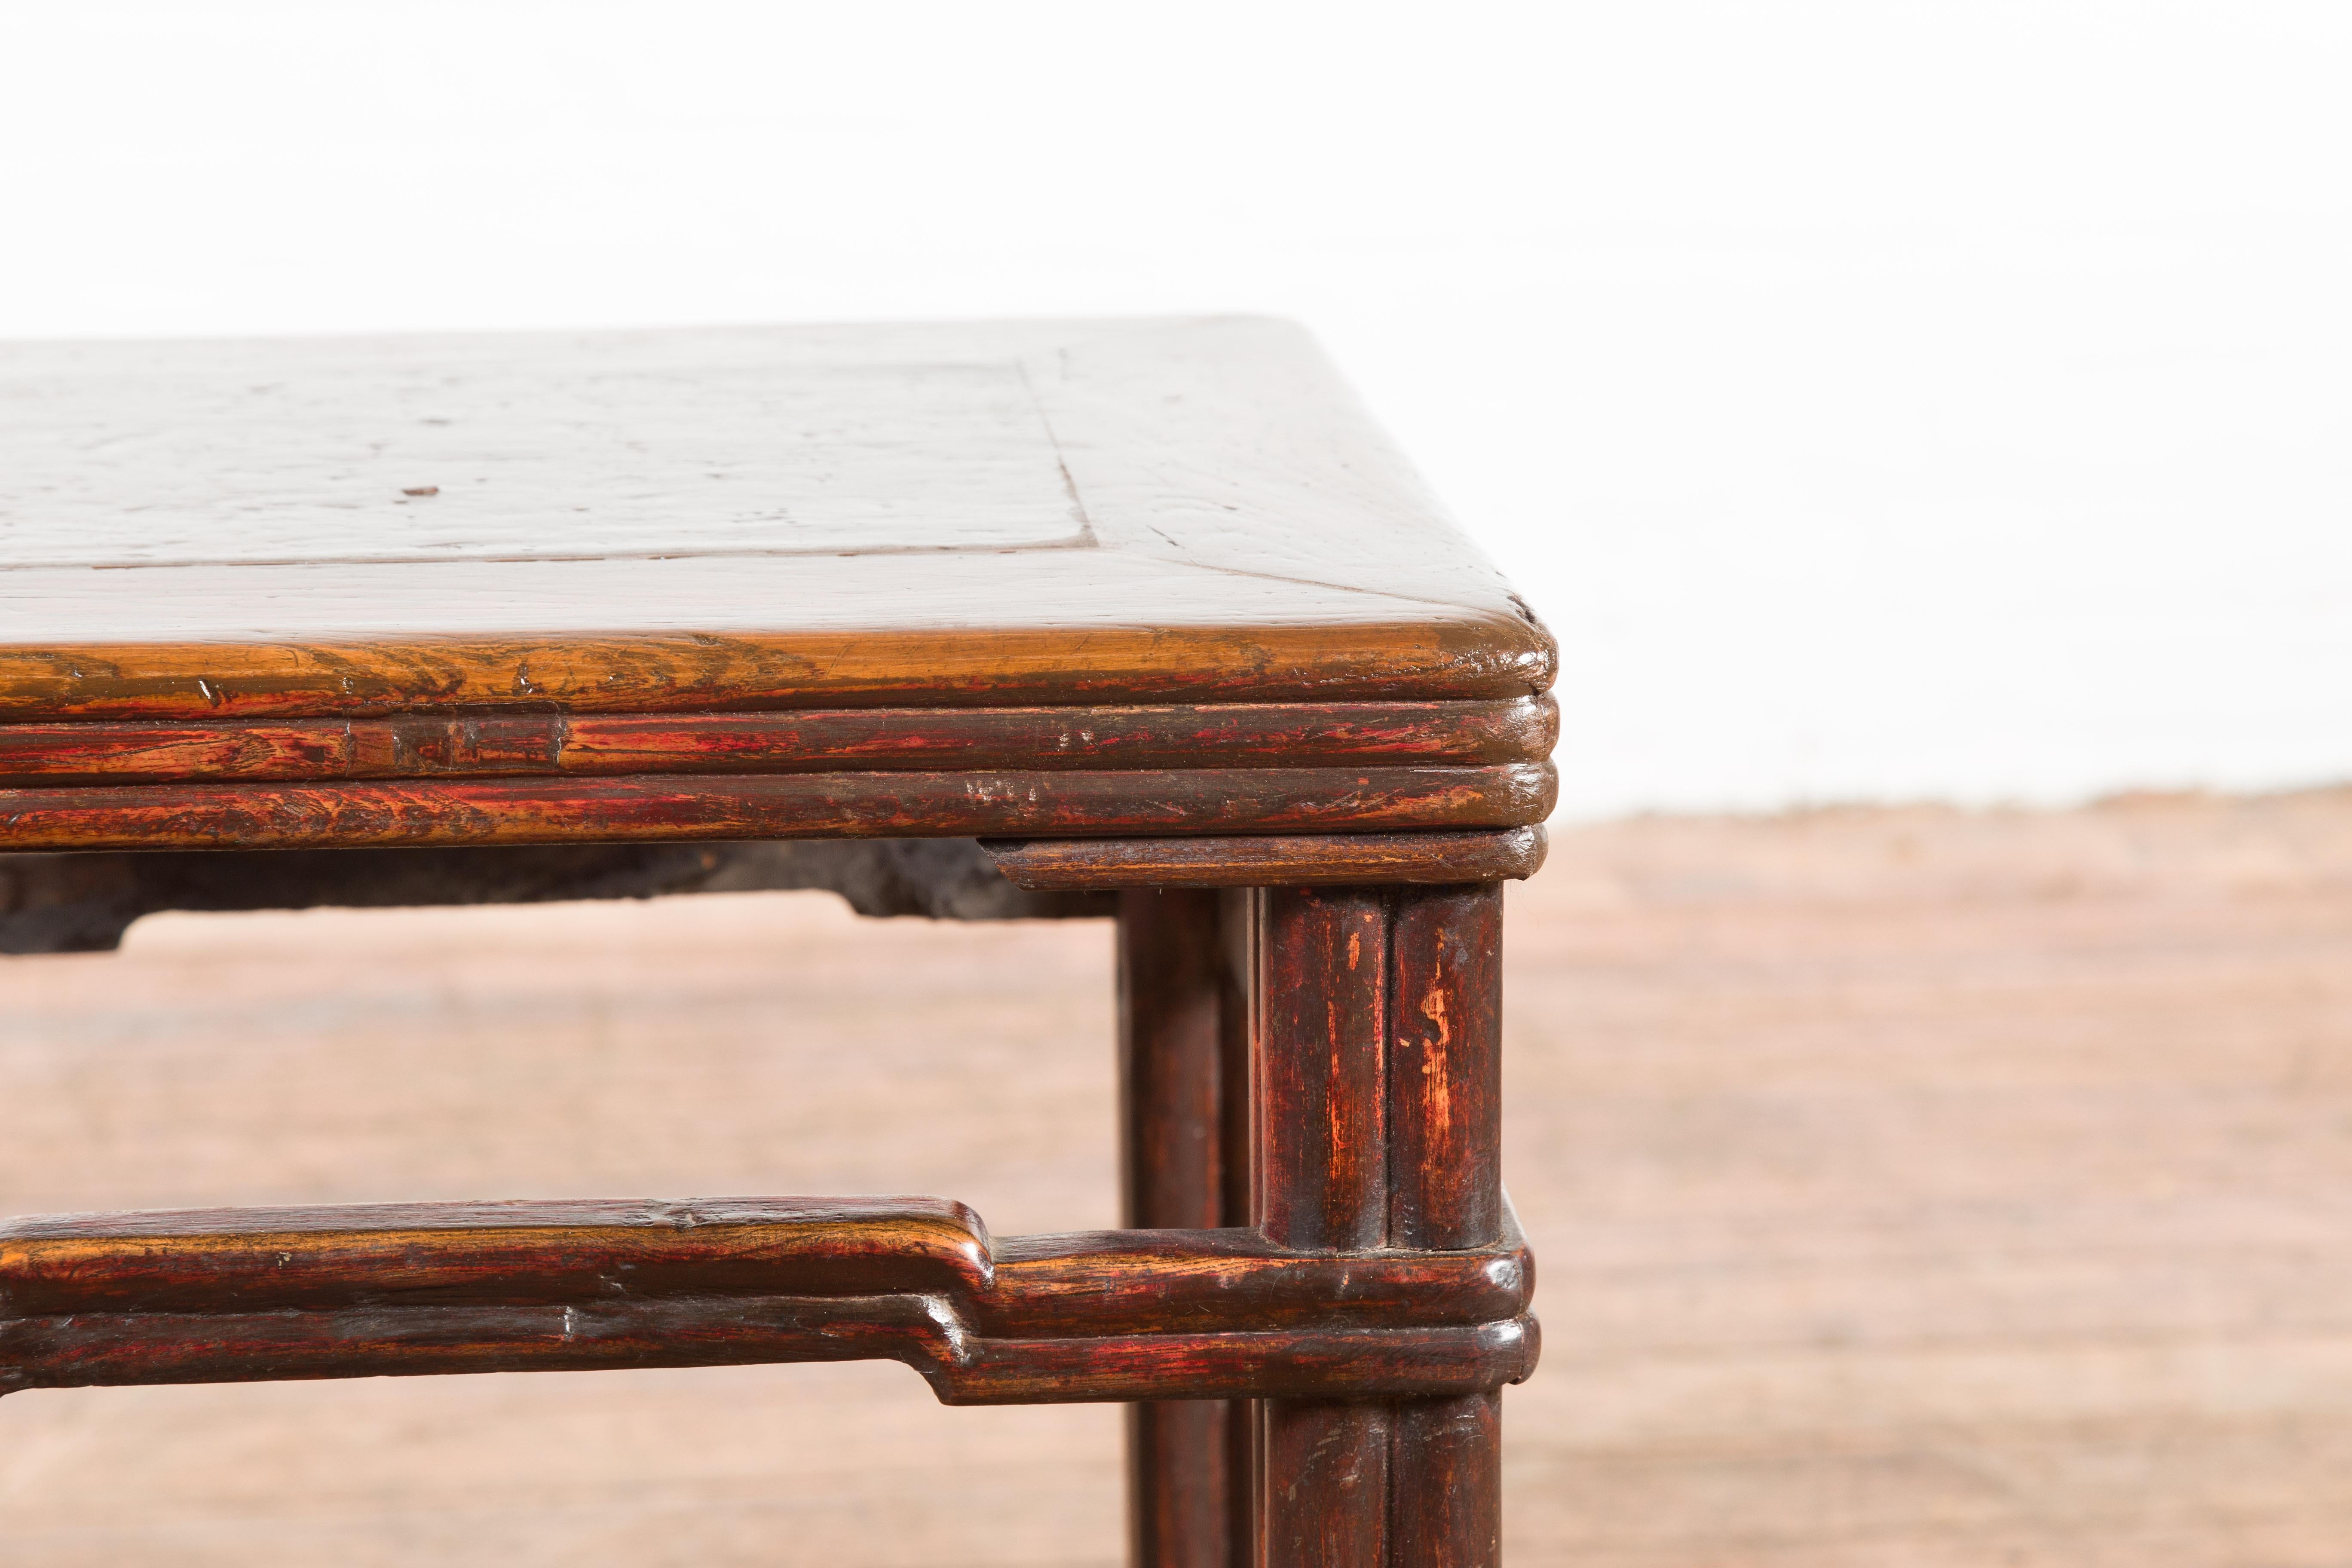 Chinese Qing Dynasty Period 19th Century Side Table with Humpback Stretchers For Sale 1